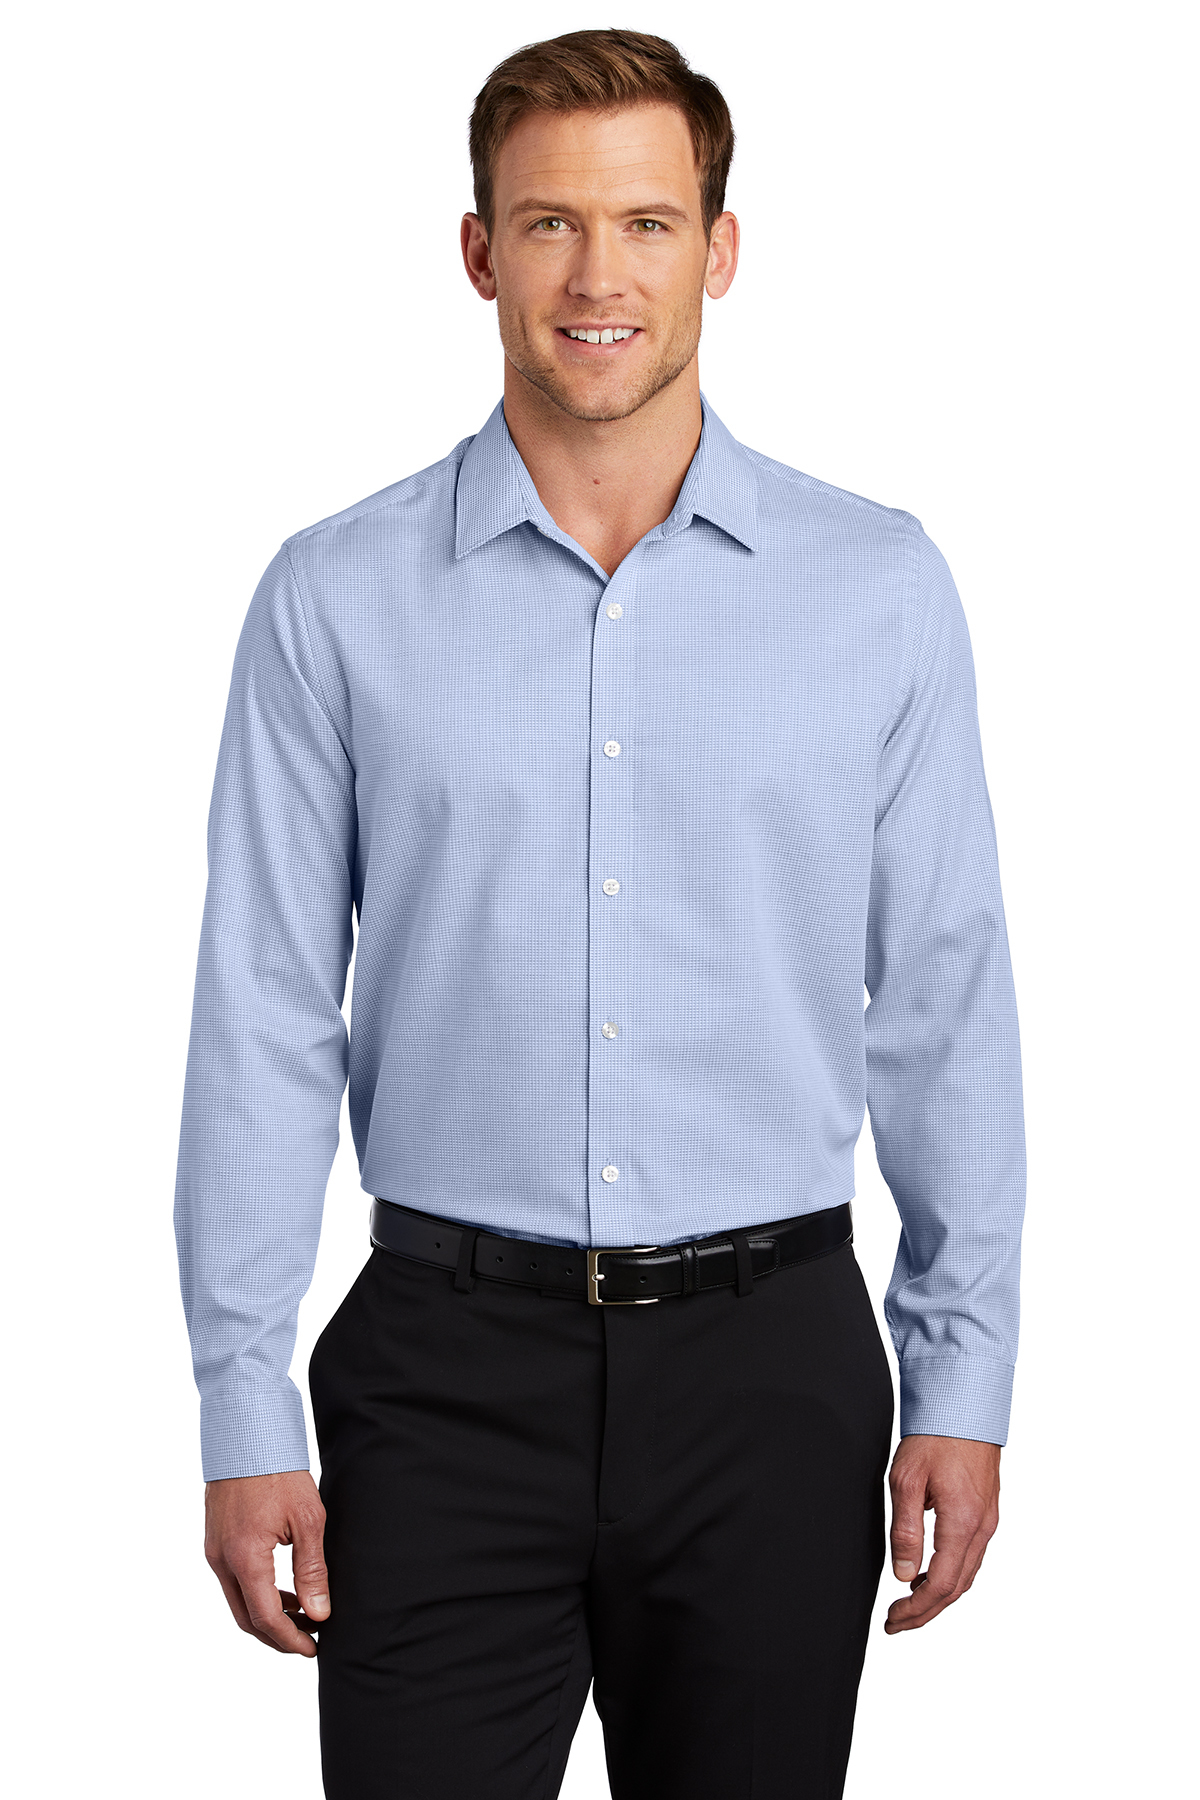 Port Authority W645 - Pincheck Easy Care Shirt